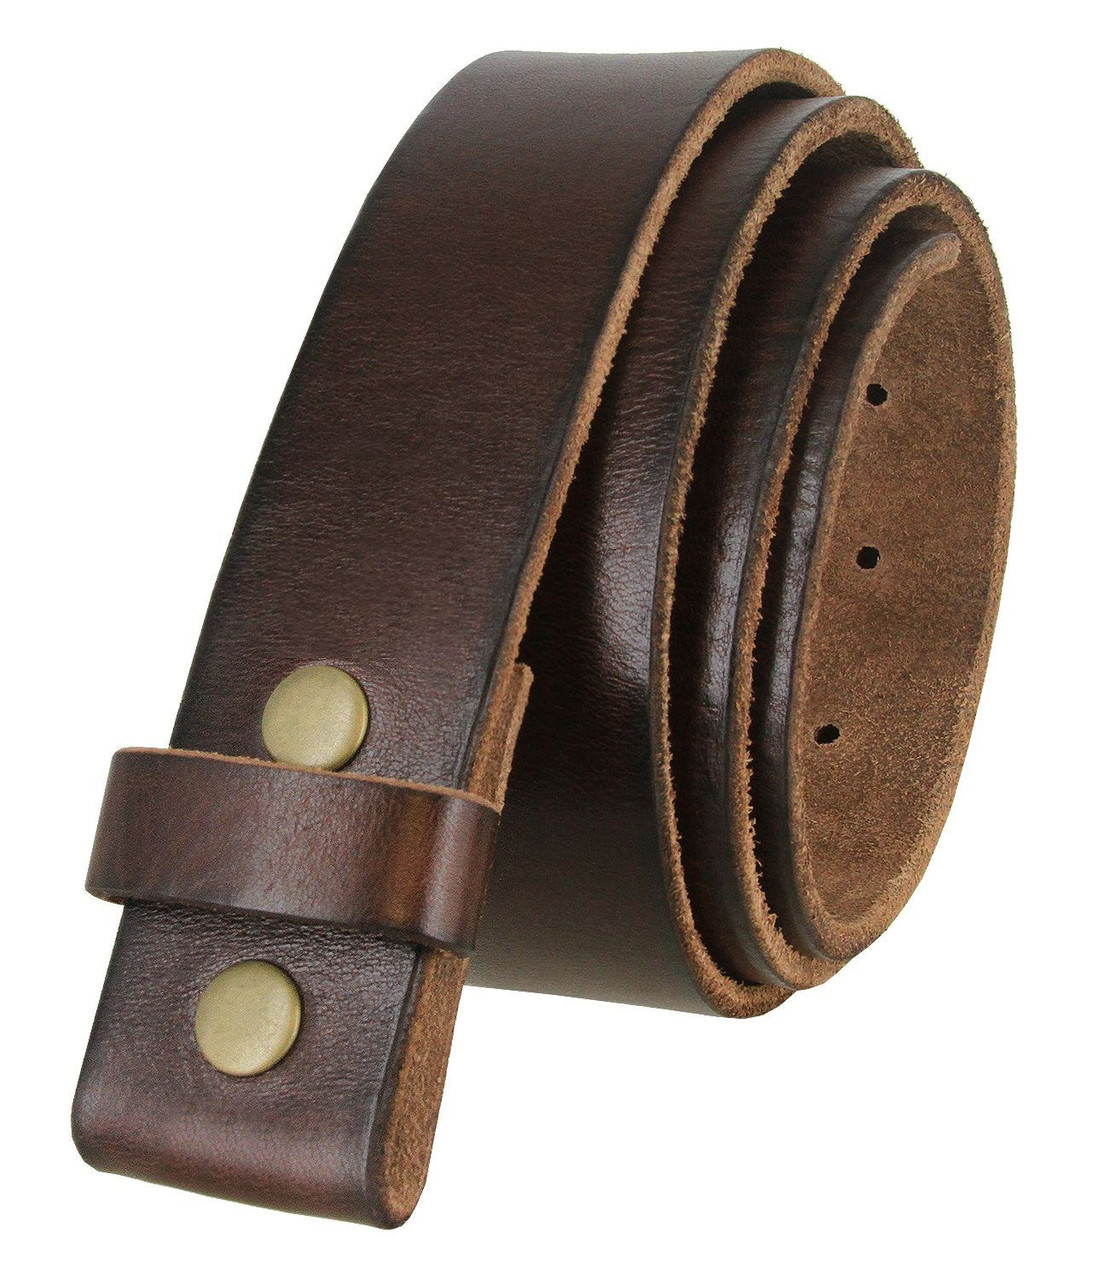 Genuine Leather No Buckle For H 38mm Replacement Belt Men's